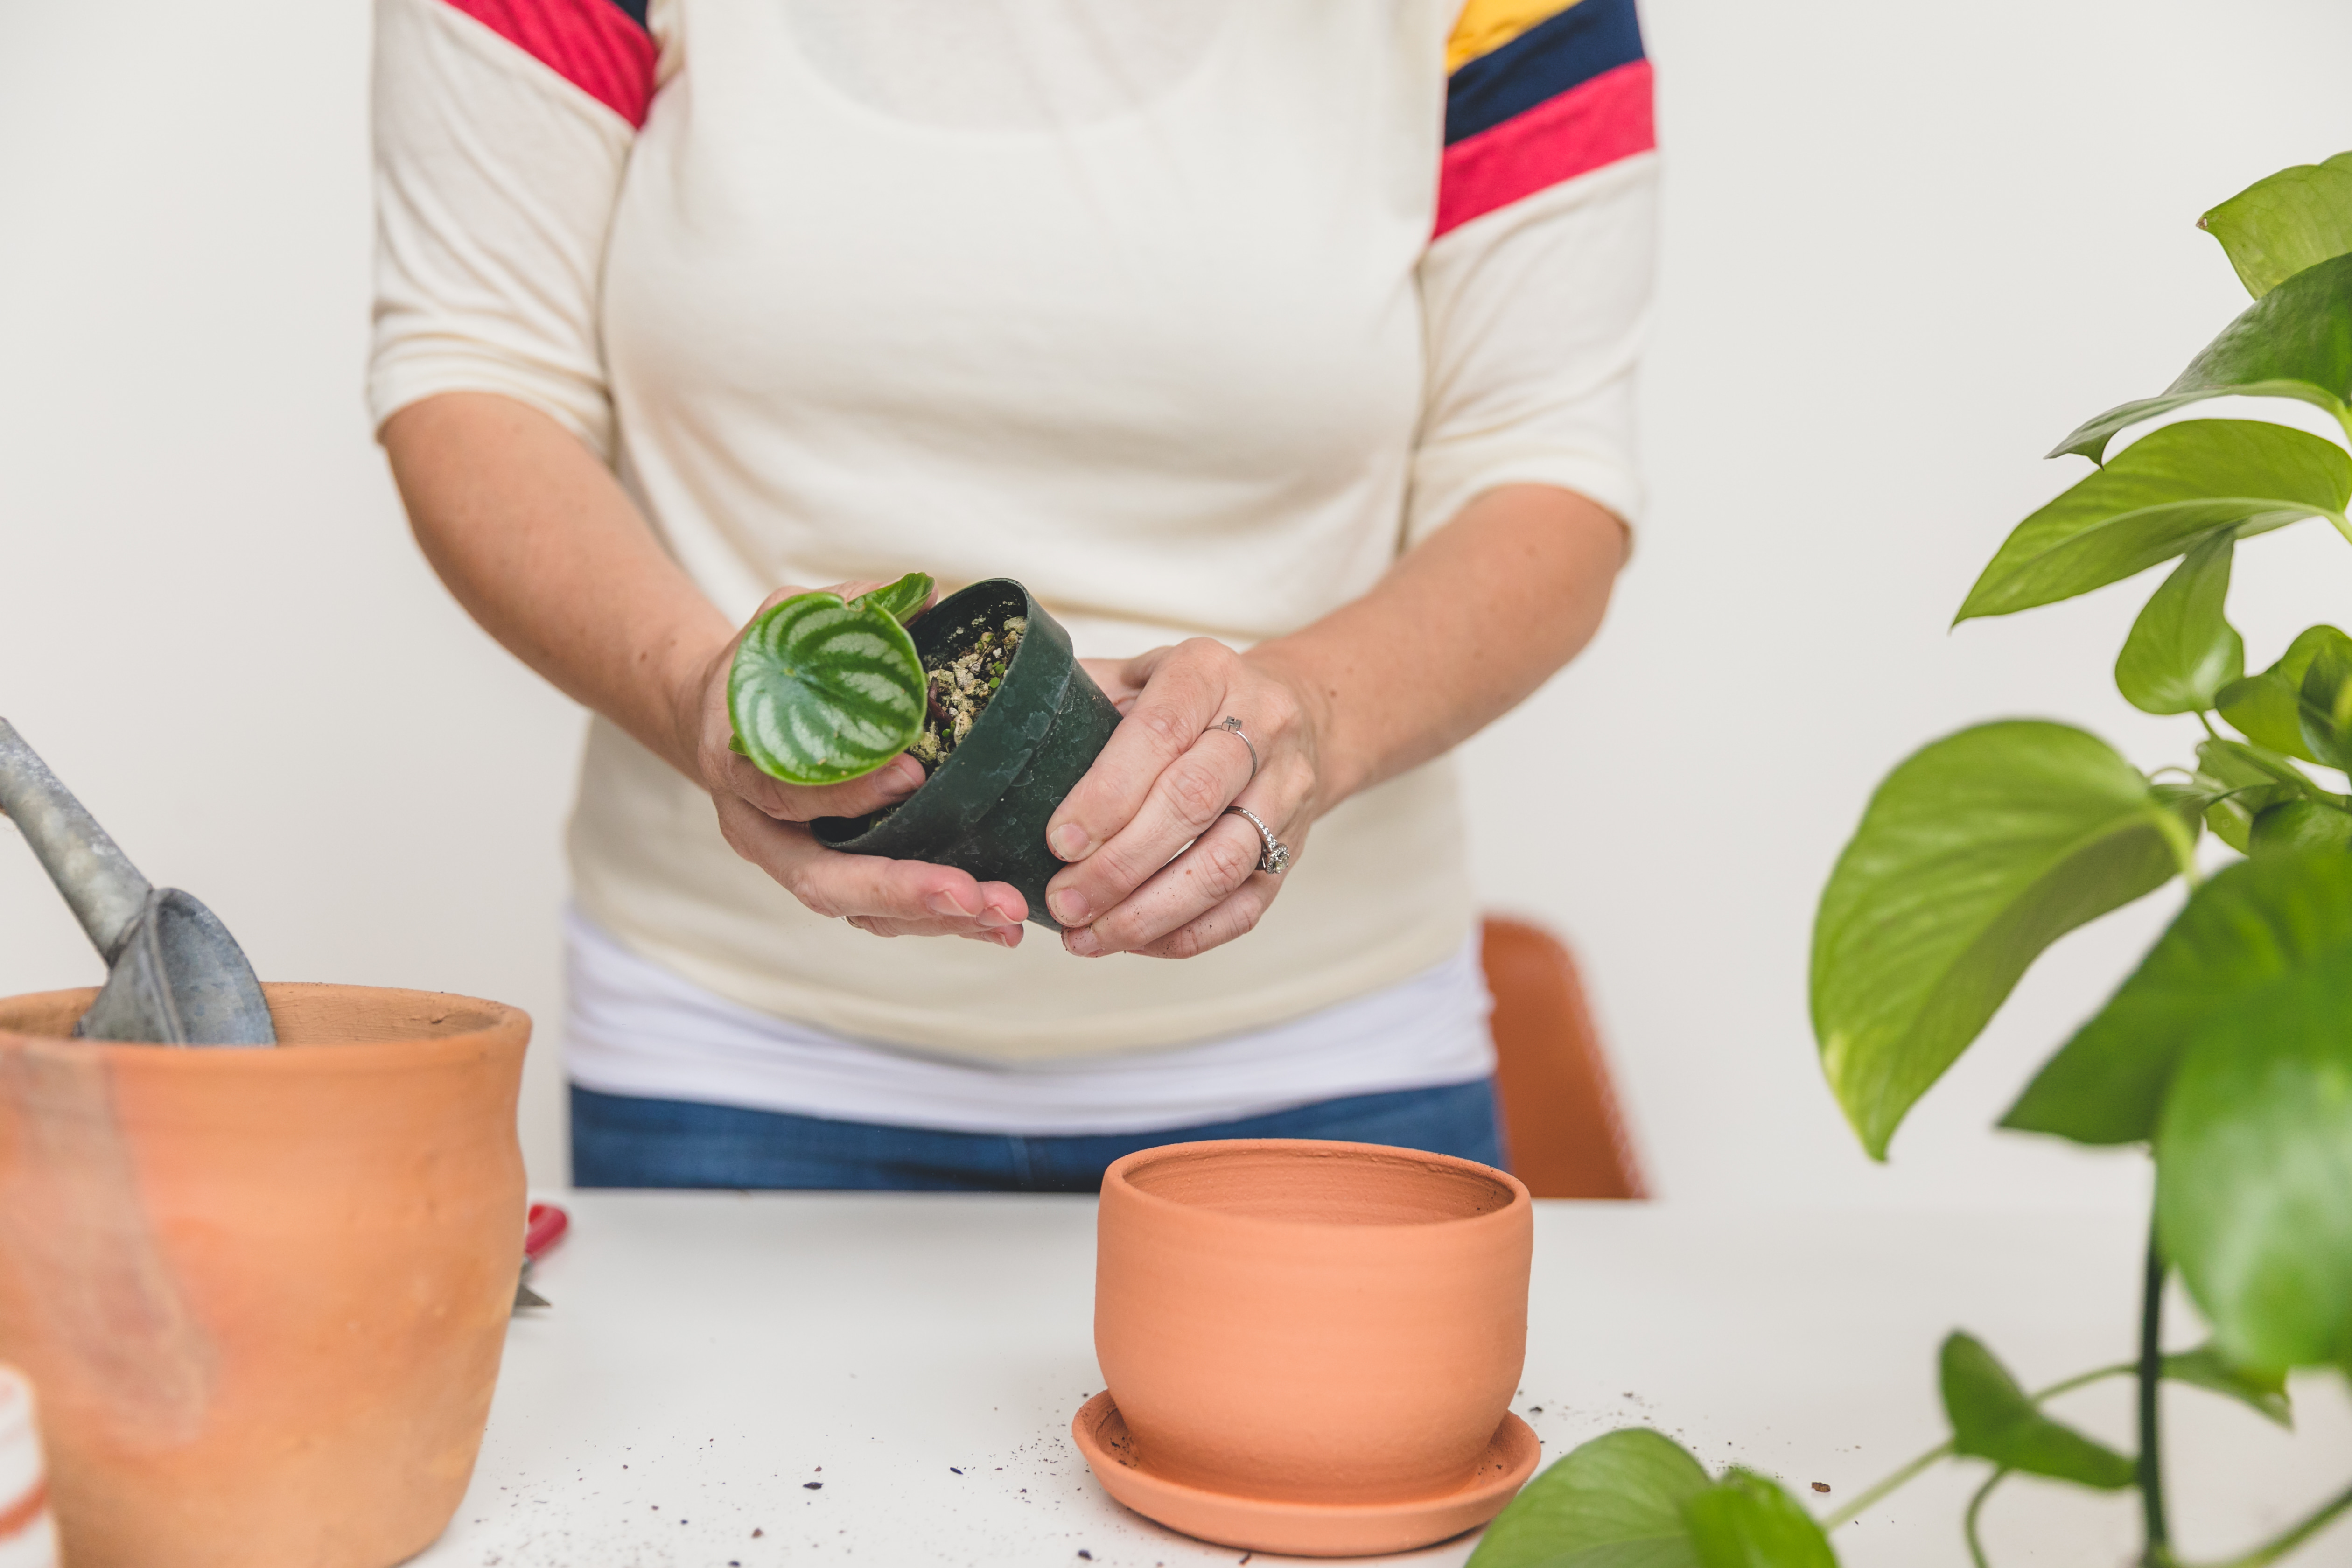 Learn step by step how to re-pot a houseplant from blogger Clever Bloom #houseplant #plantcare #plantlady